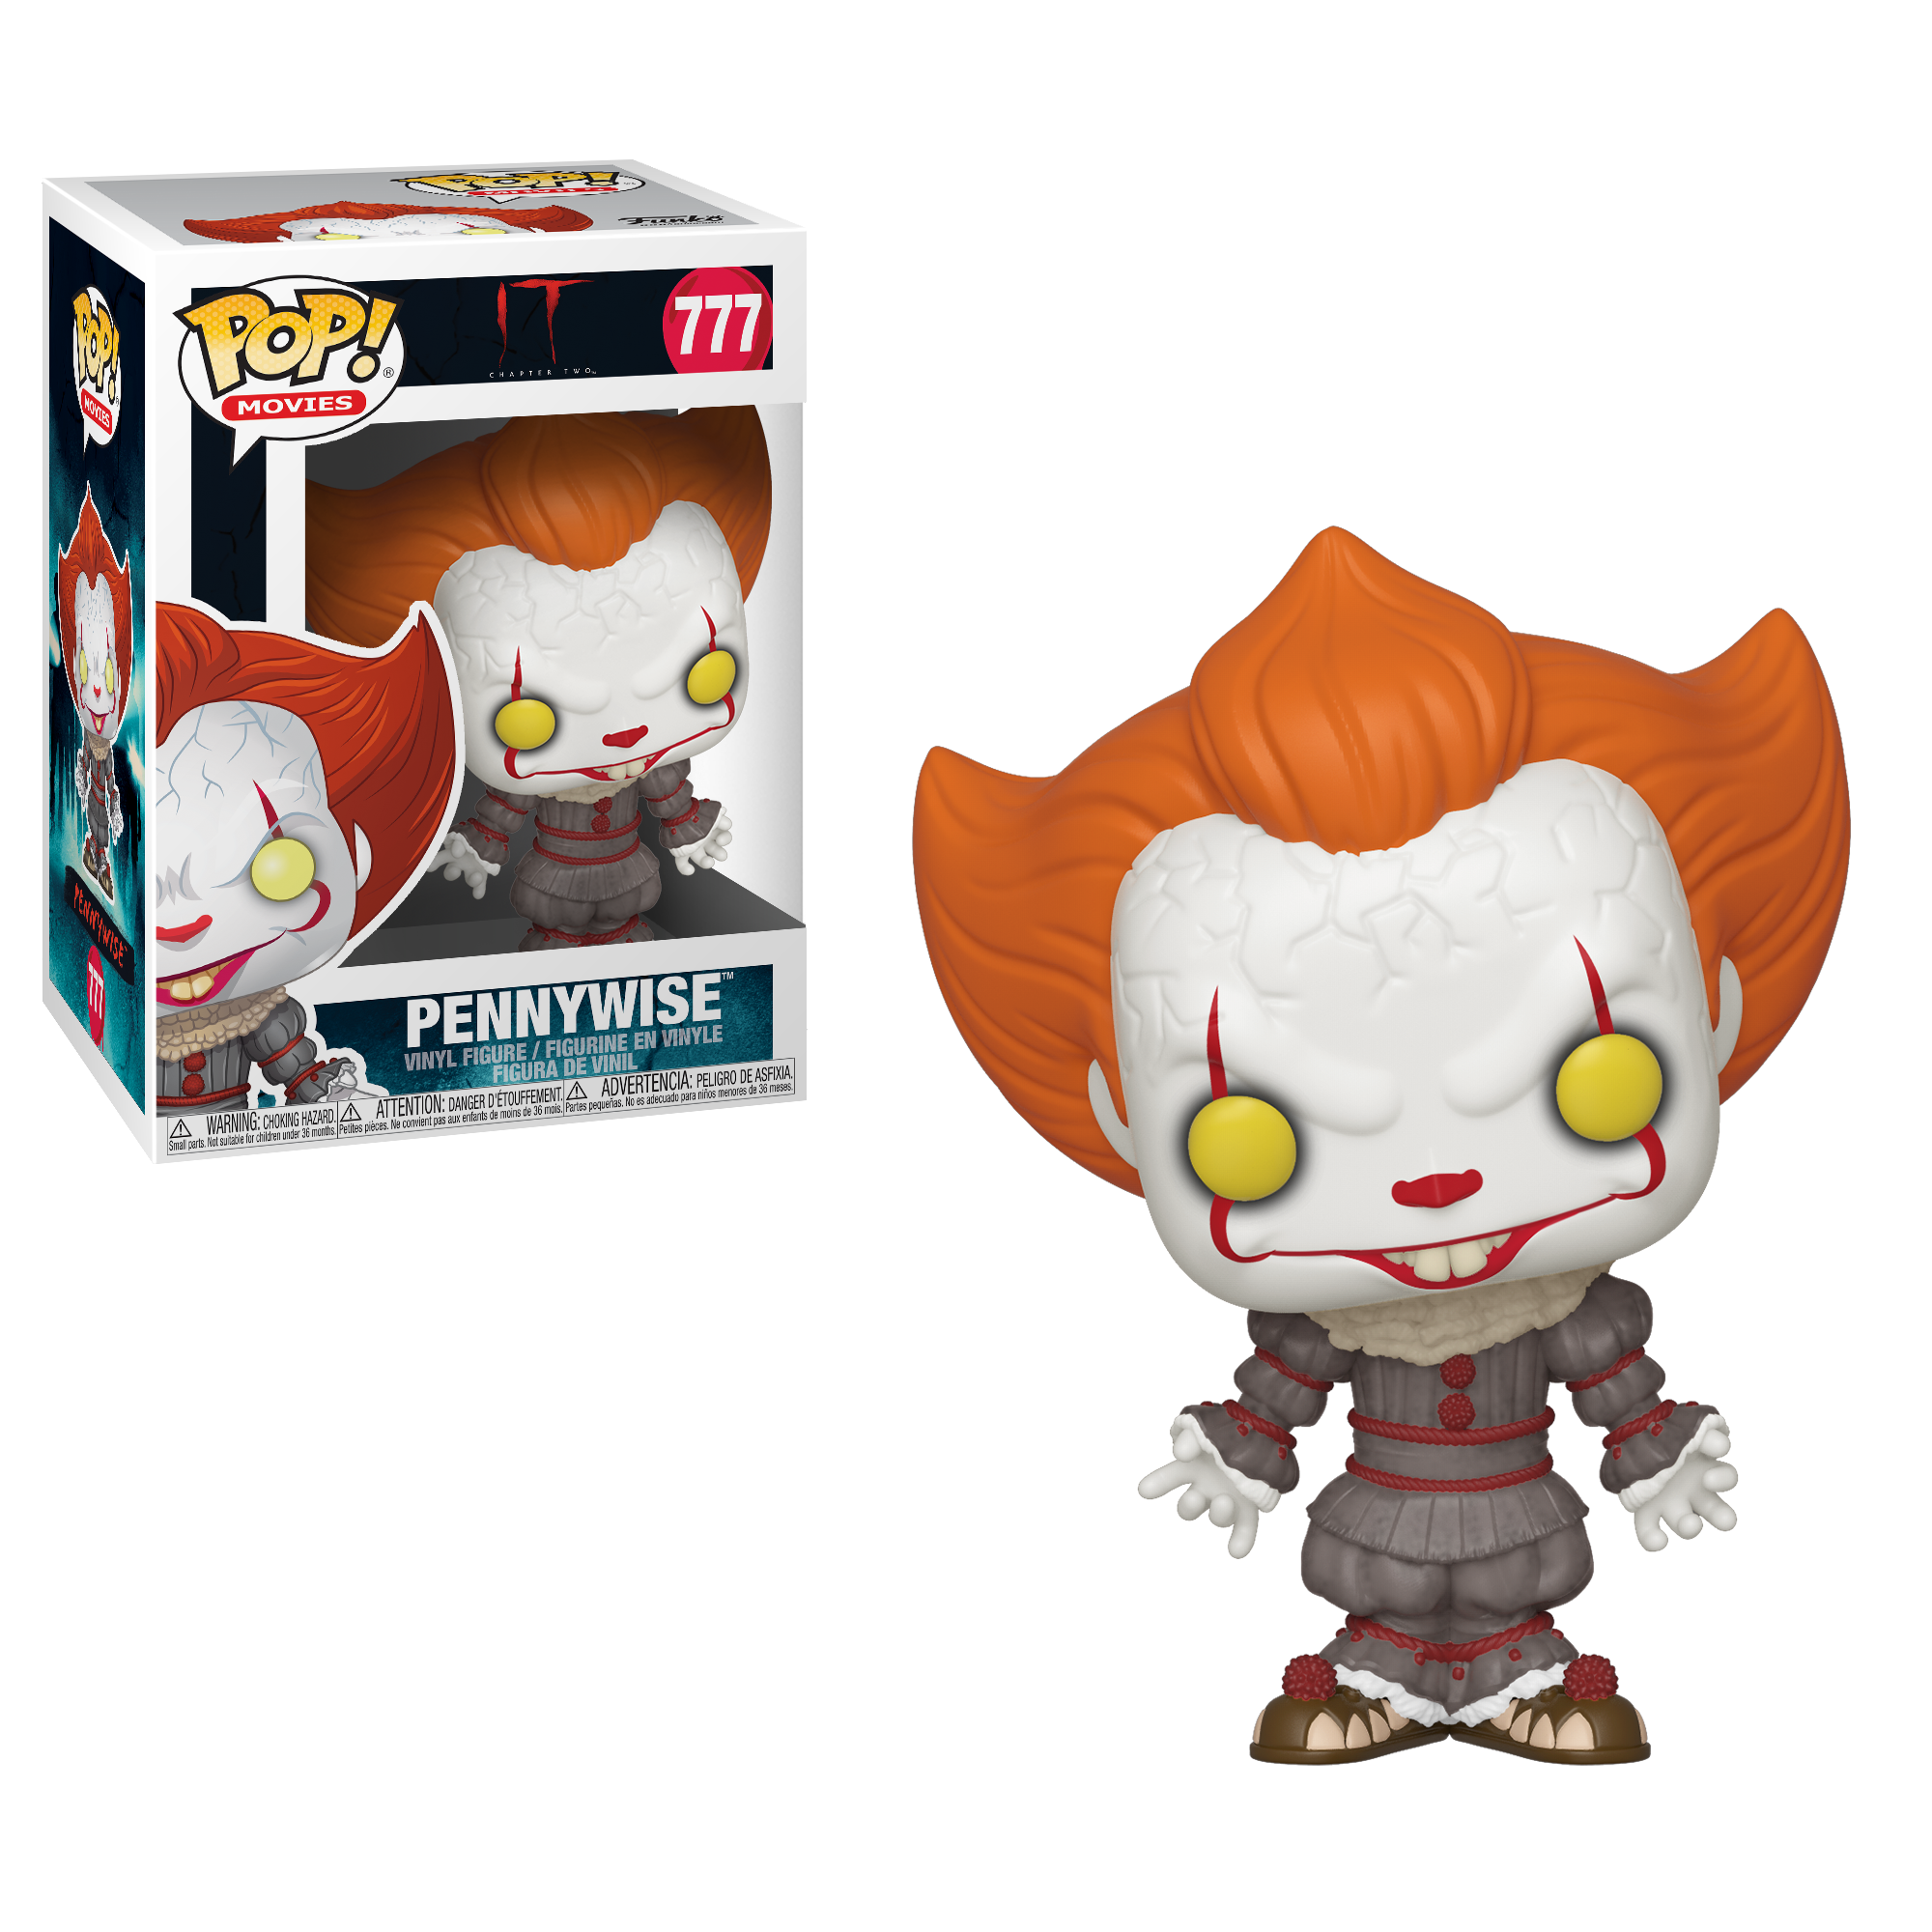 Funko Pop! IT: Movie – Pennywise #777